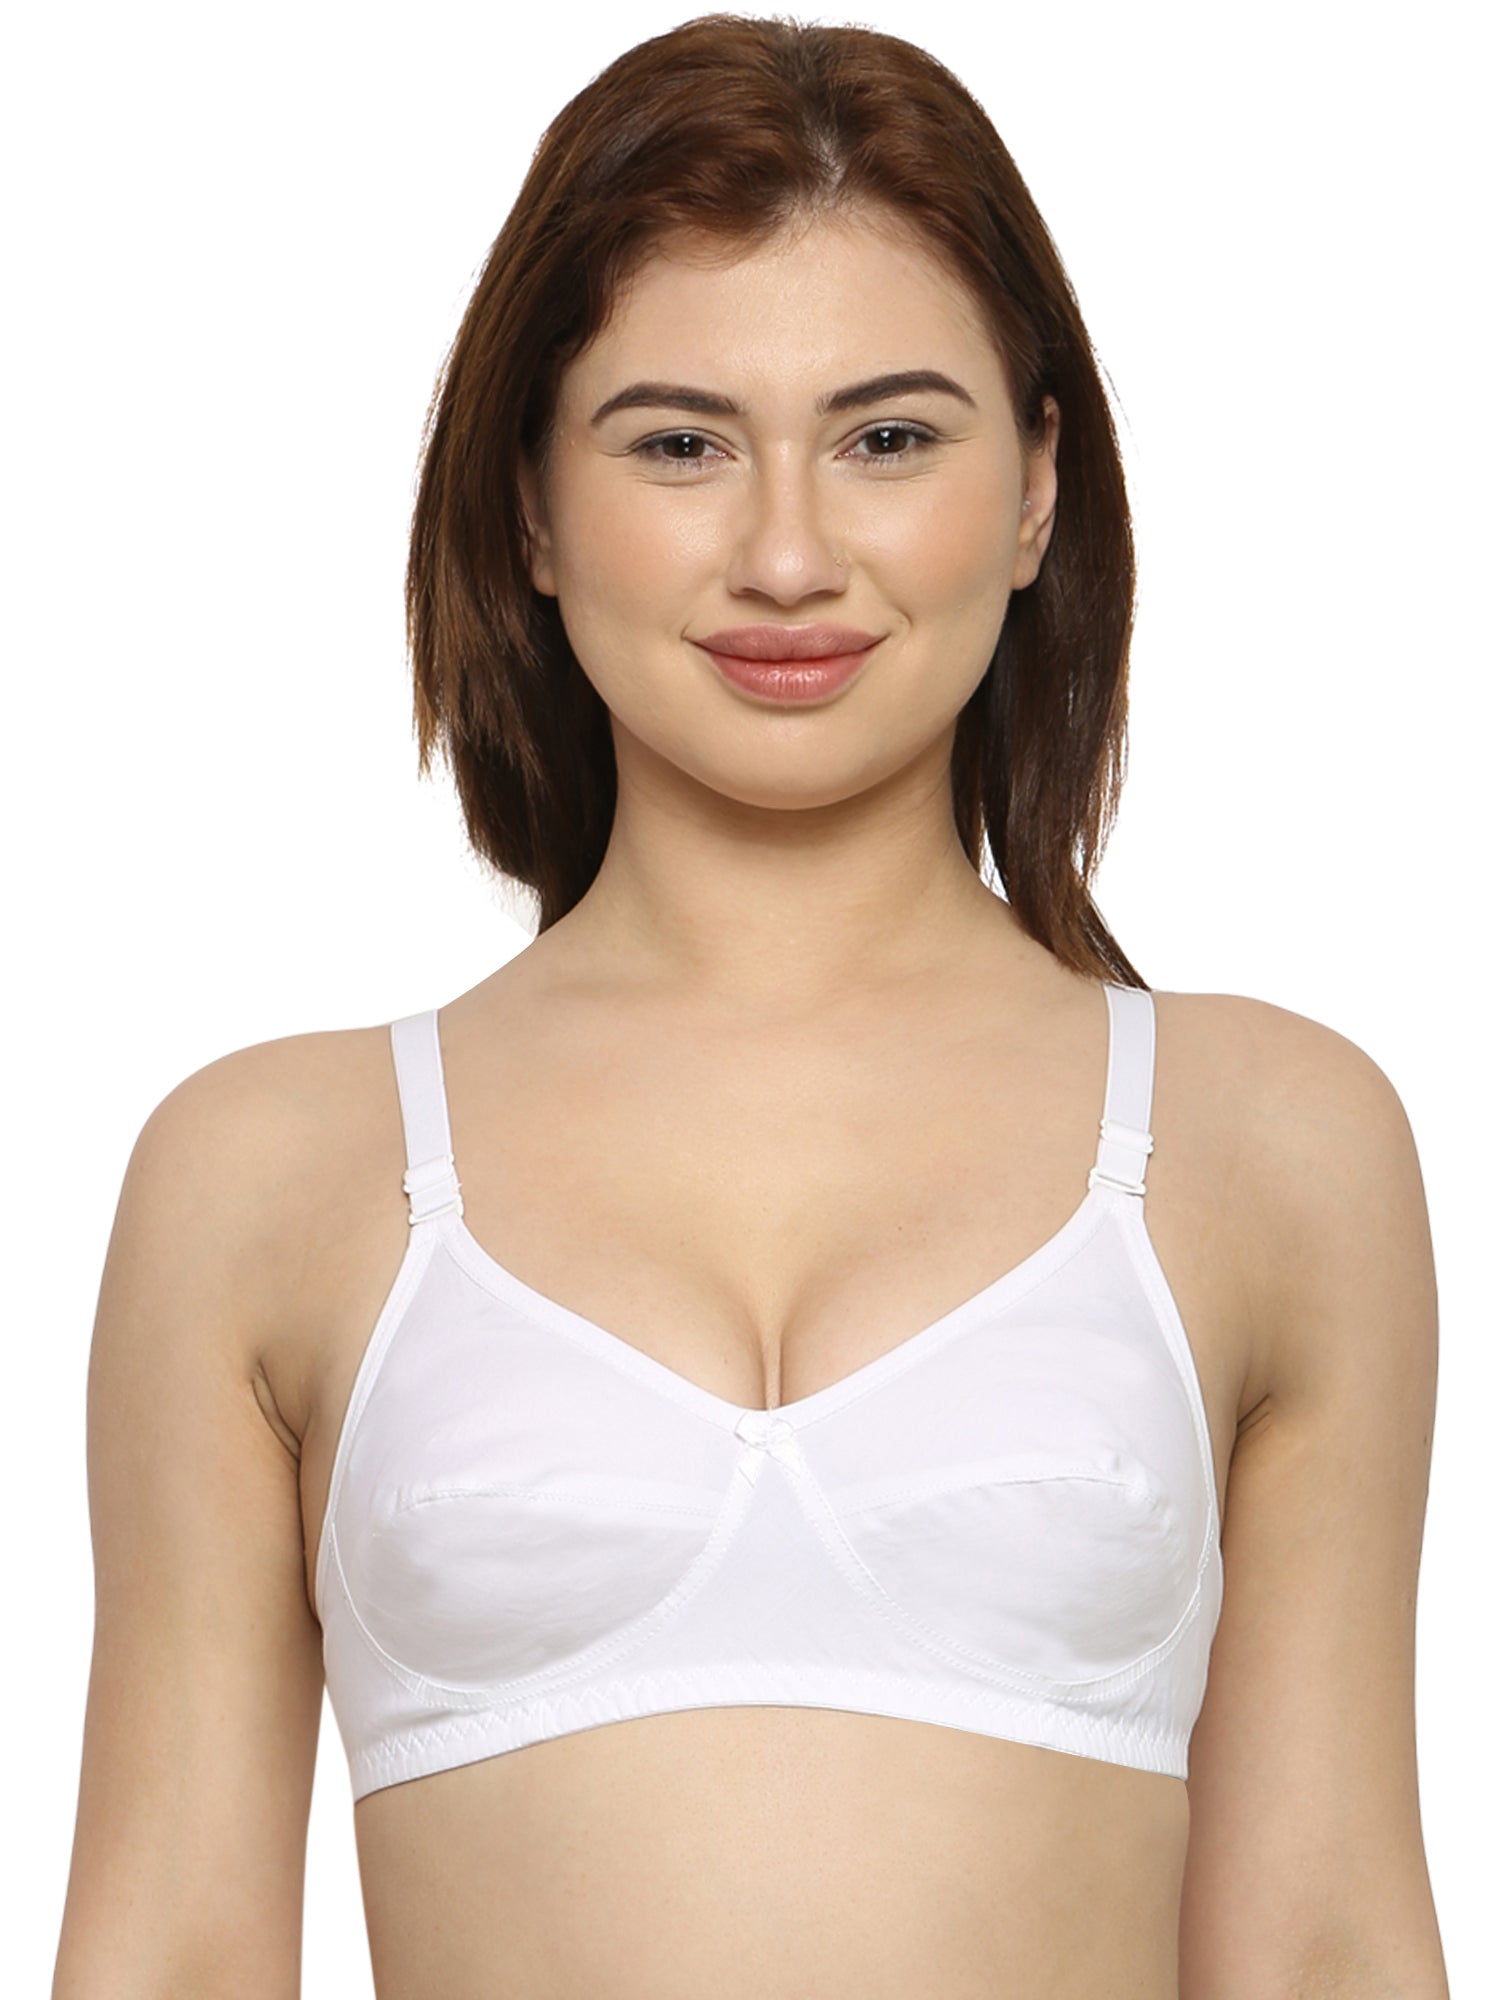 Cotton Non-padded Bra In Hot Pink, Bras :: 4 Bras For 499 Online